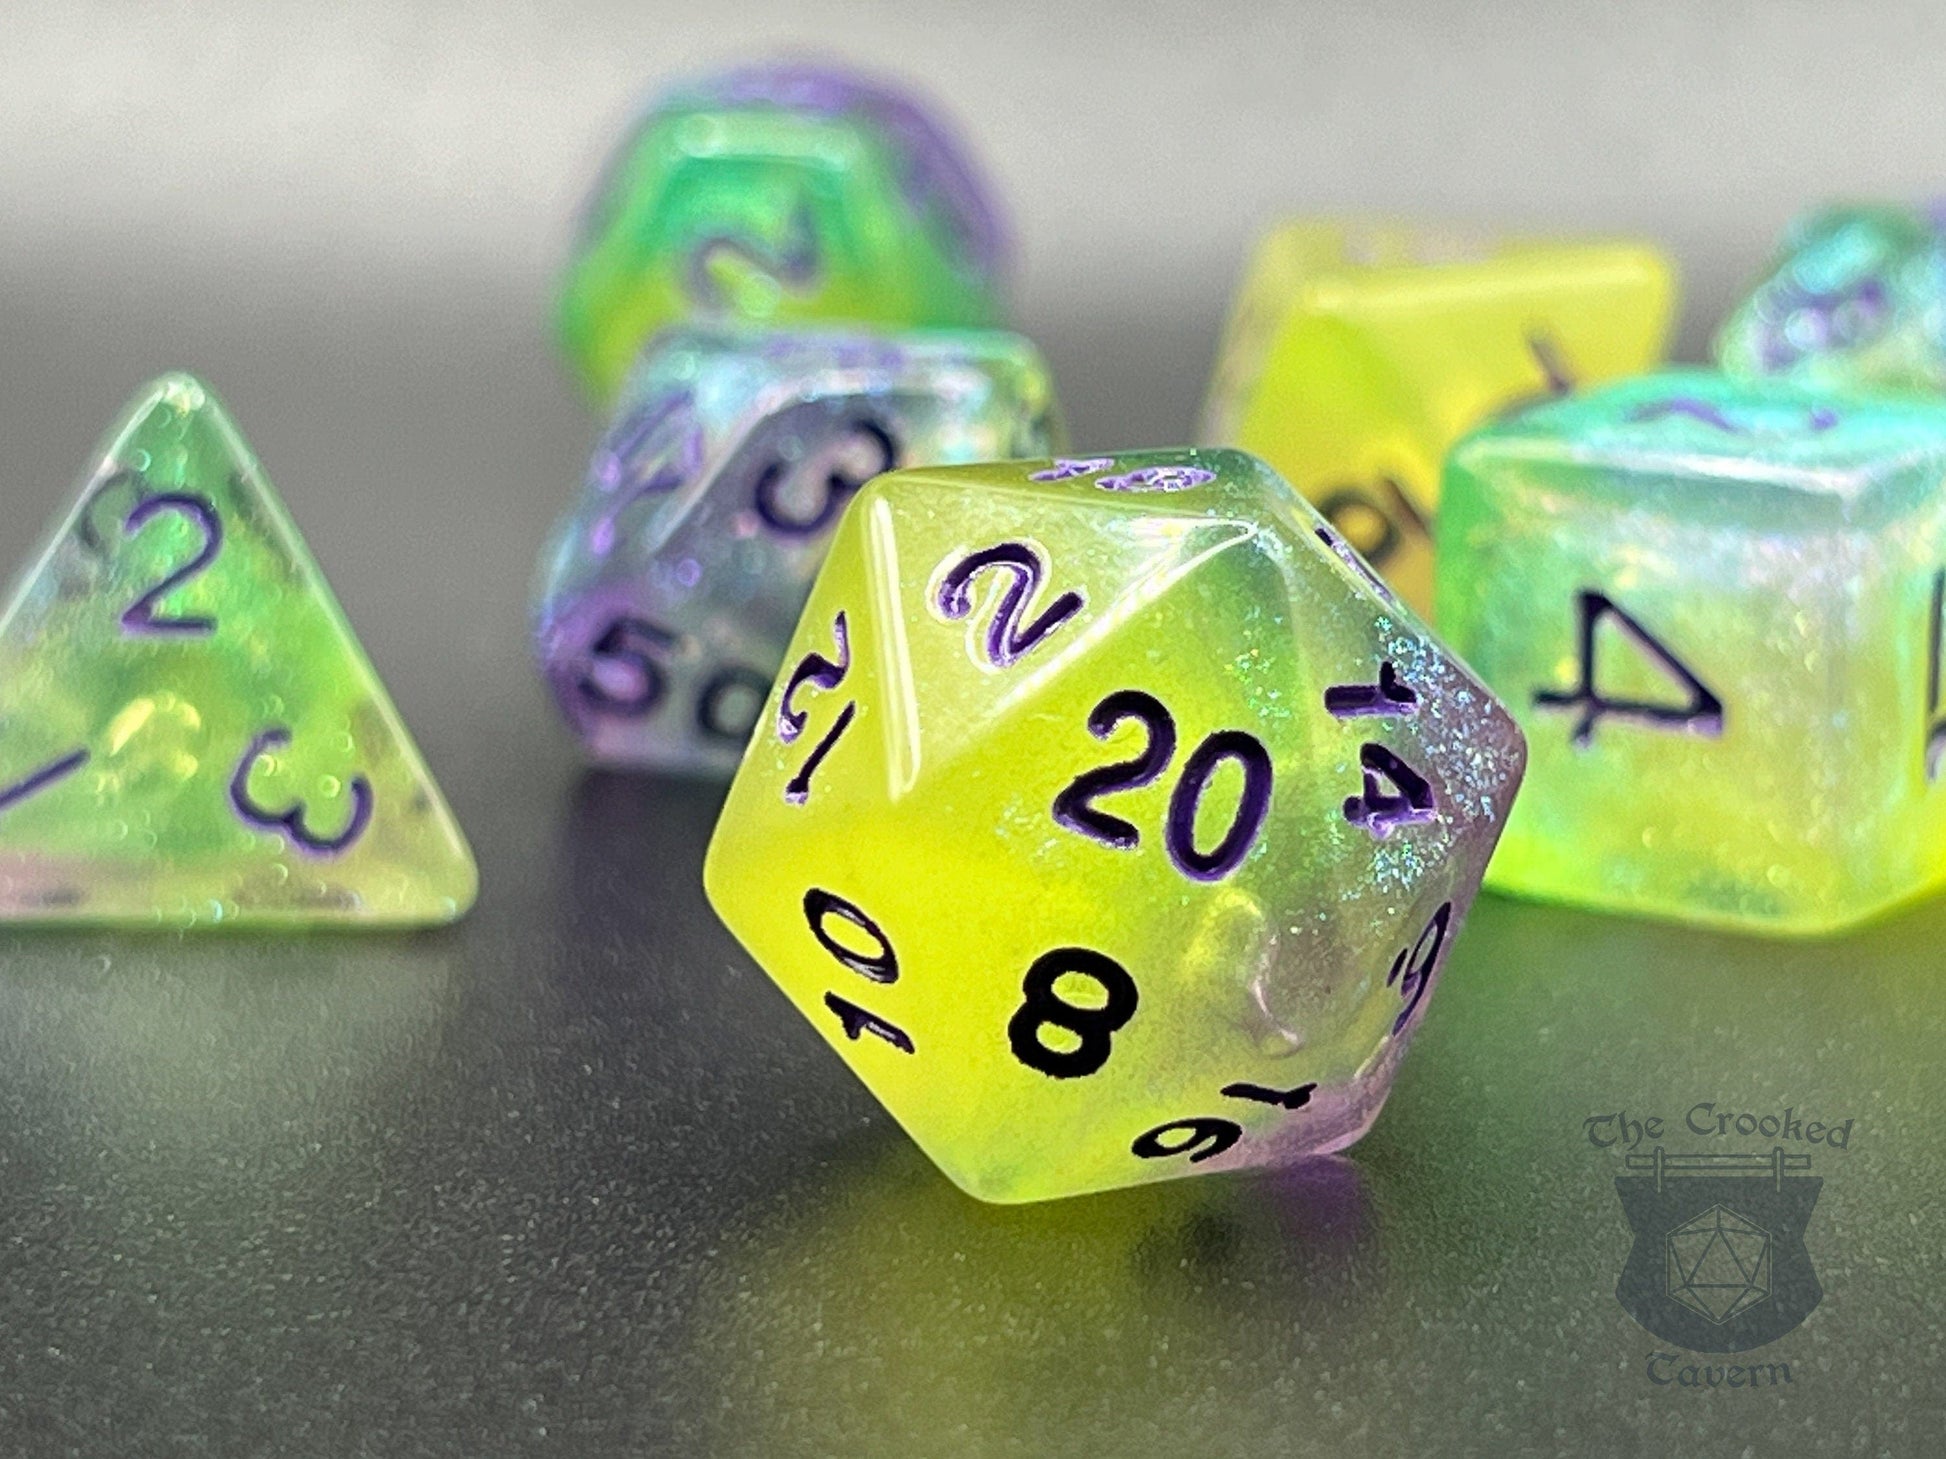 The Crooked Tavern Dice Sets Glow in the Dark RPG Dice Set | Purple/Green Polyhedral RPG Dice